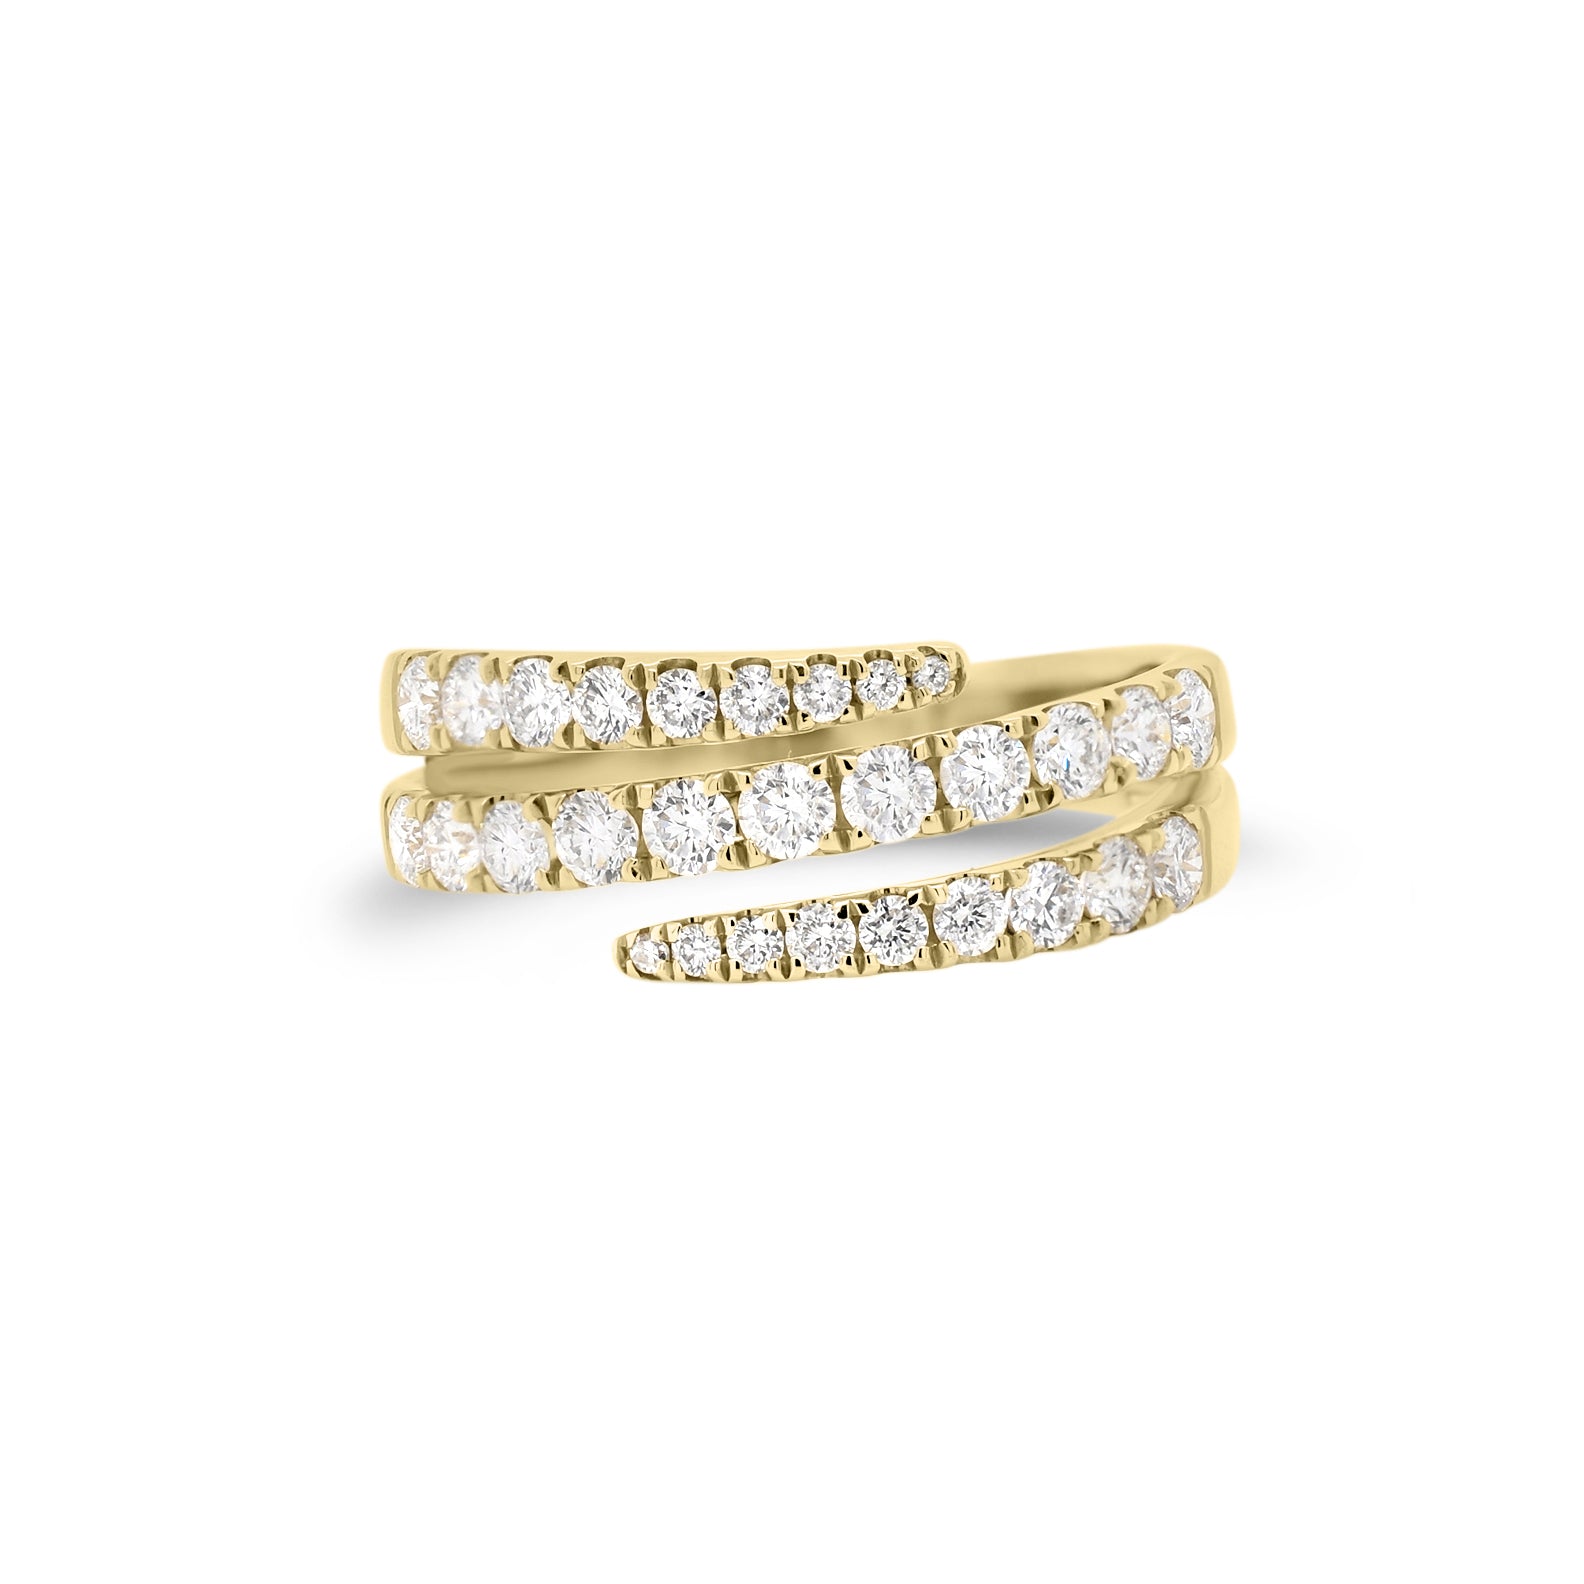 Diamond Open Double Wrap Ring  - 14K gold weighing 3.36 grams  - 29 round diamonds totaling 0.85 carats